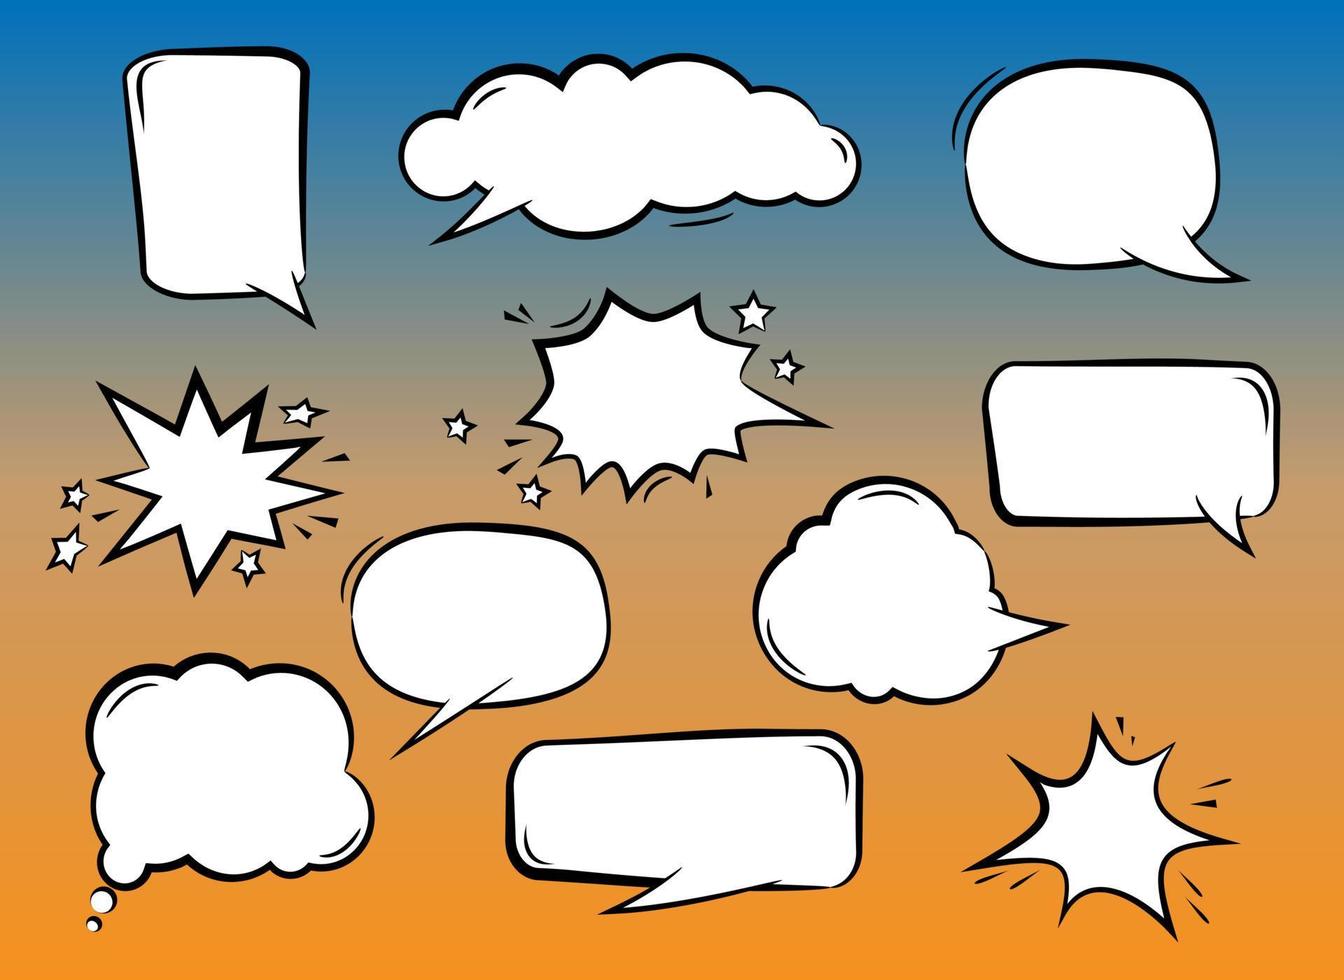 Comic speech bubbles set different shapes. Comic sound effects in pop art style. Vector illustration.